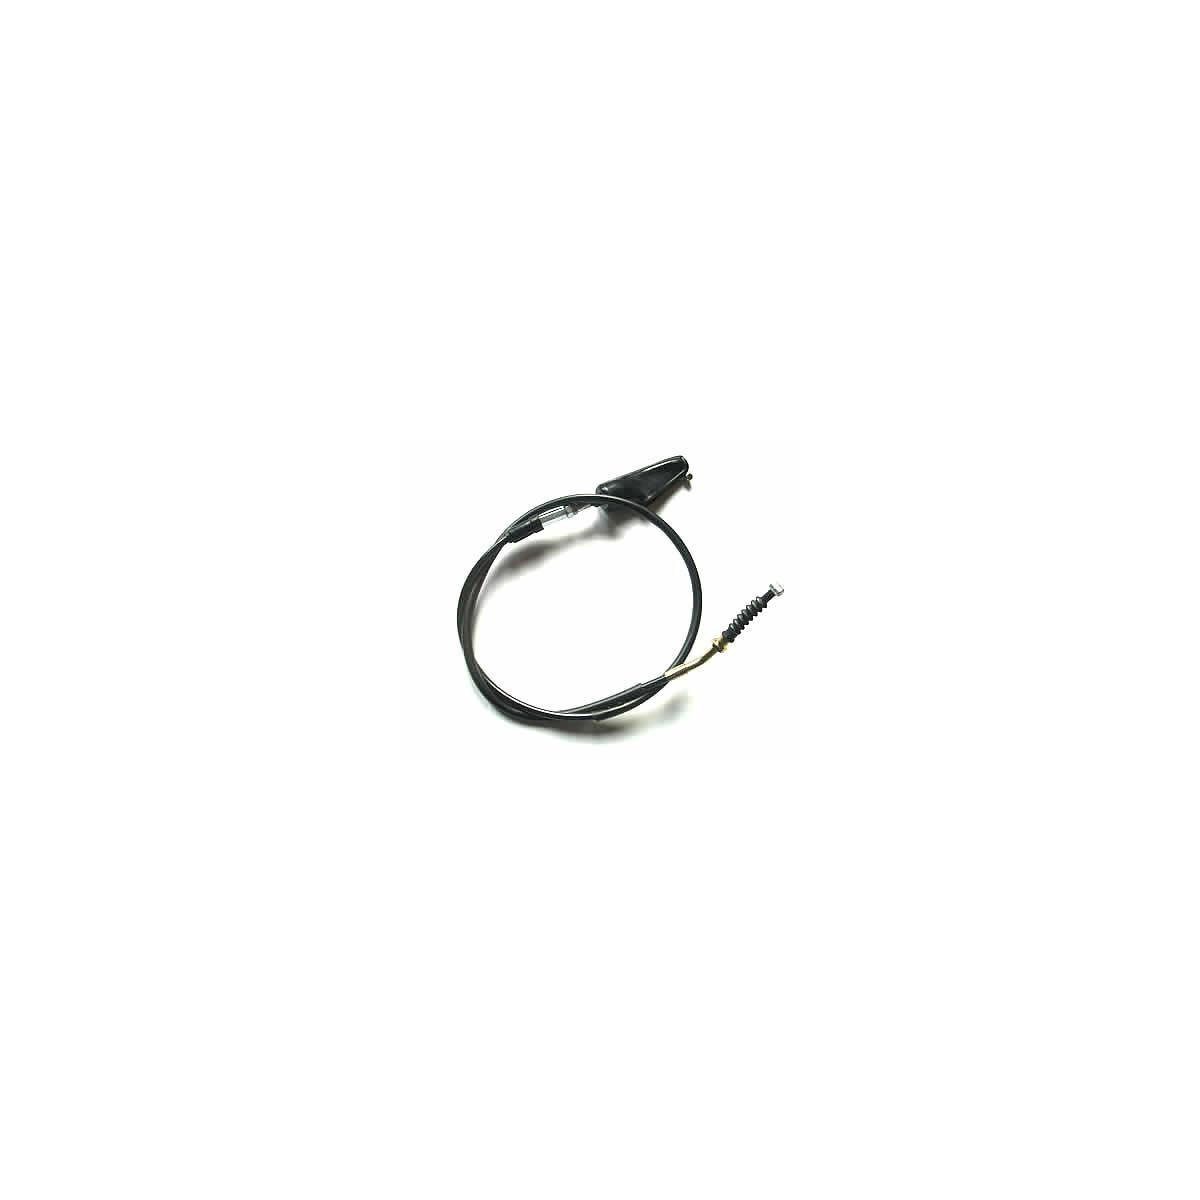 ZAP Clutch Cable  Honda CRF 250 10-13, CRF 450 09-12